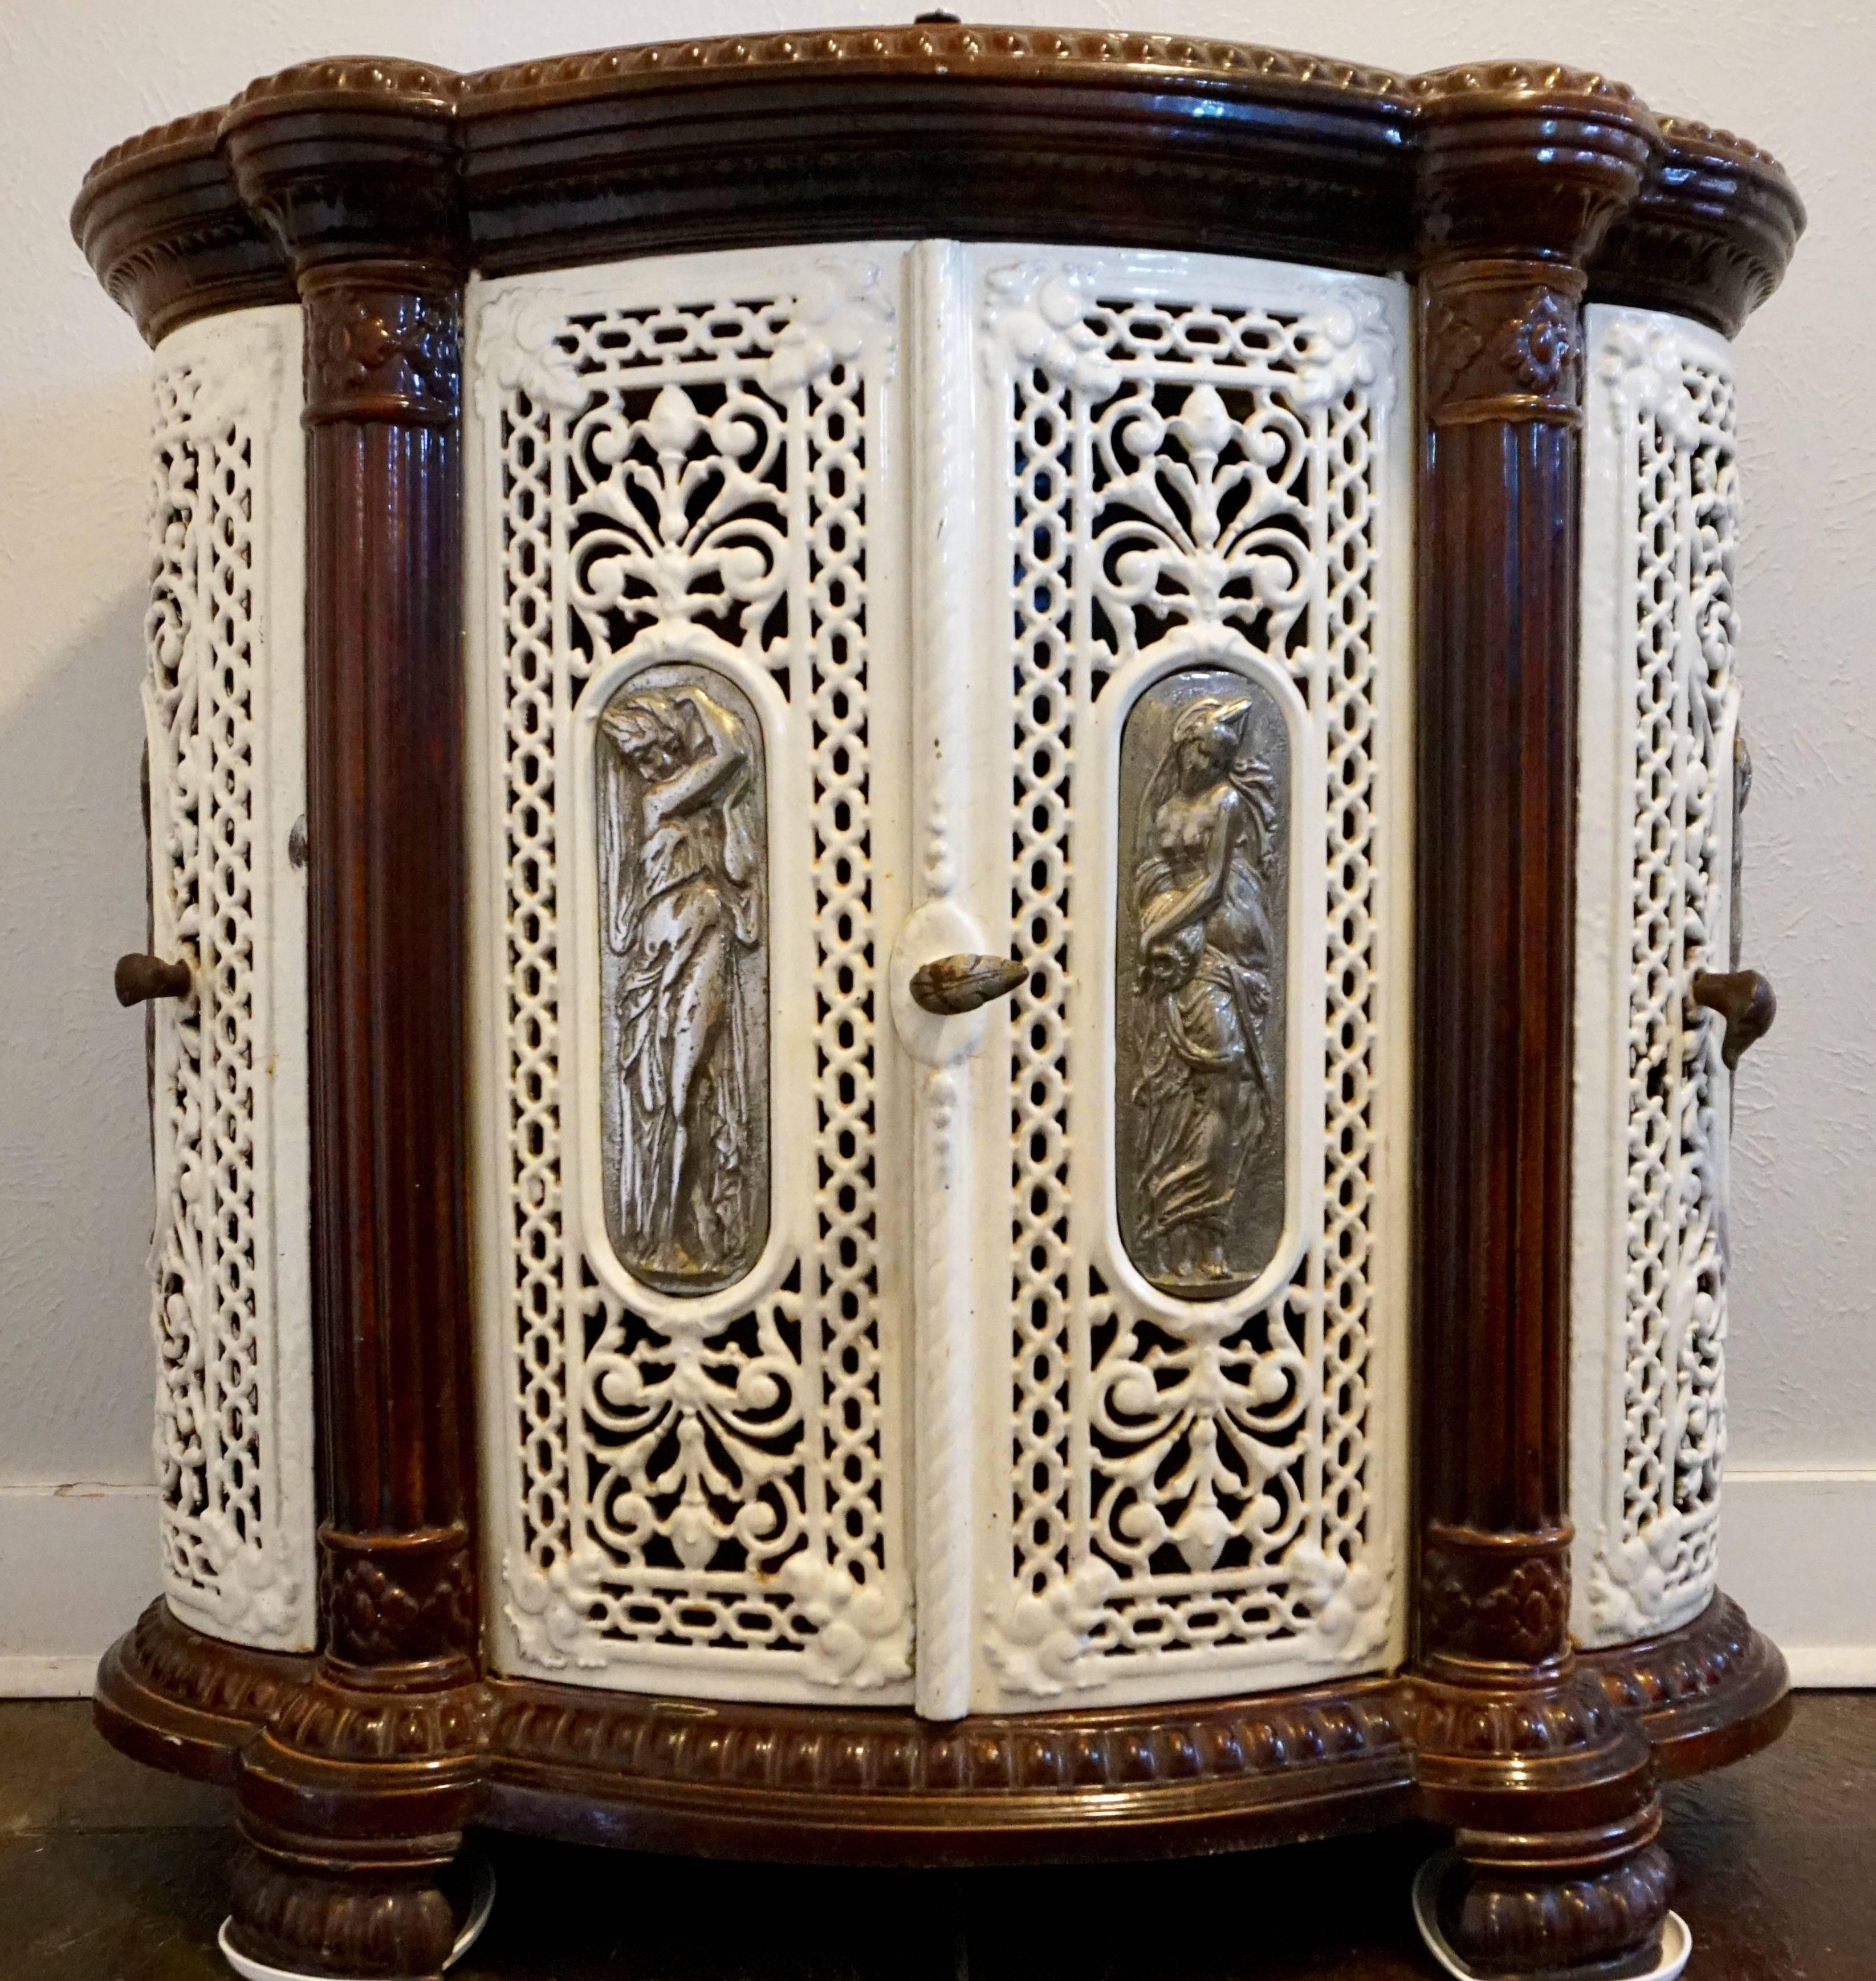 Cast iron stove from 1900 Art Nouveau. Godin design stove from circa 1900. Good for room warmth and has a food warmer. Godin was known for inovation and he knew that the only thing worse than a warm home was cold food. Five beautiful plaques adorn